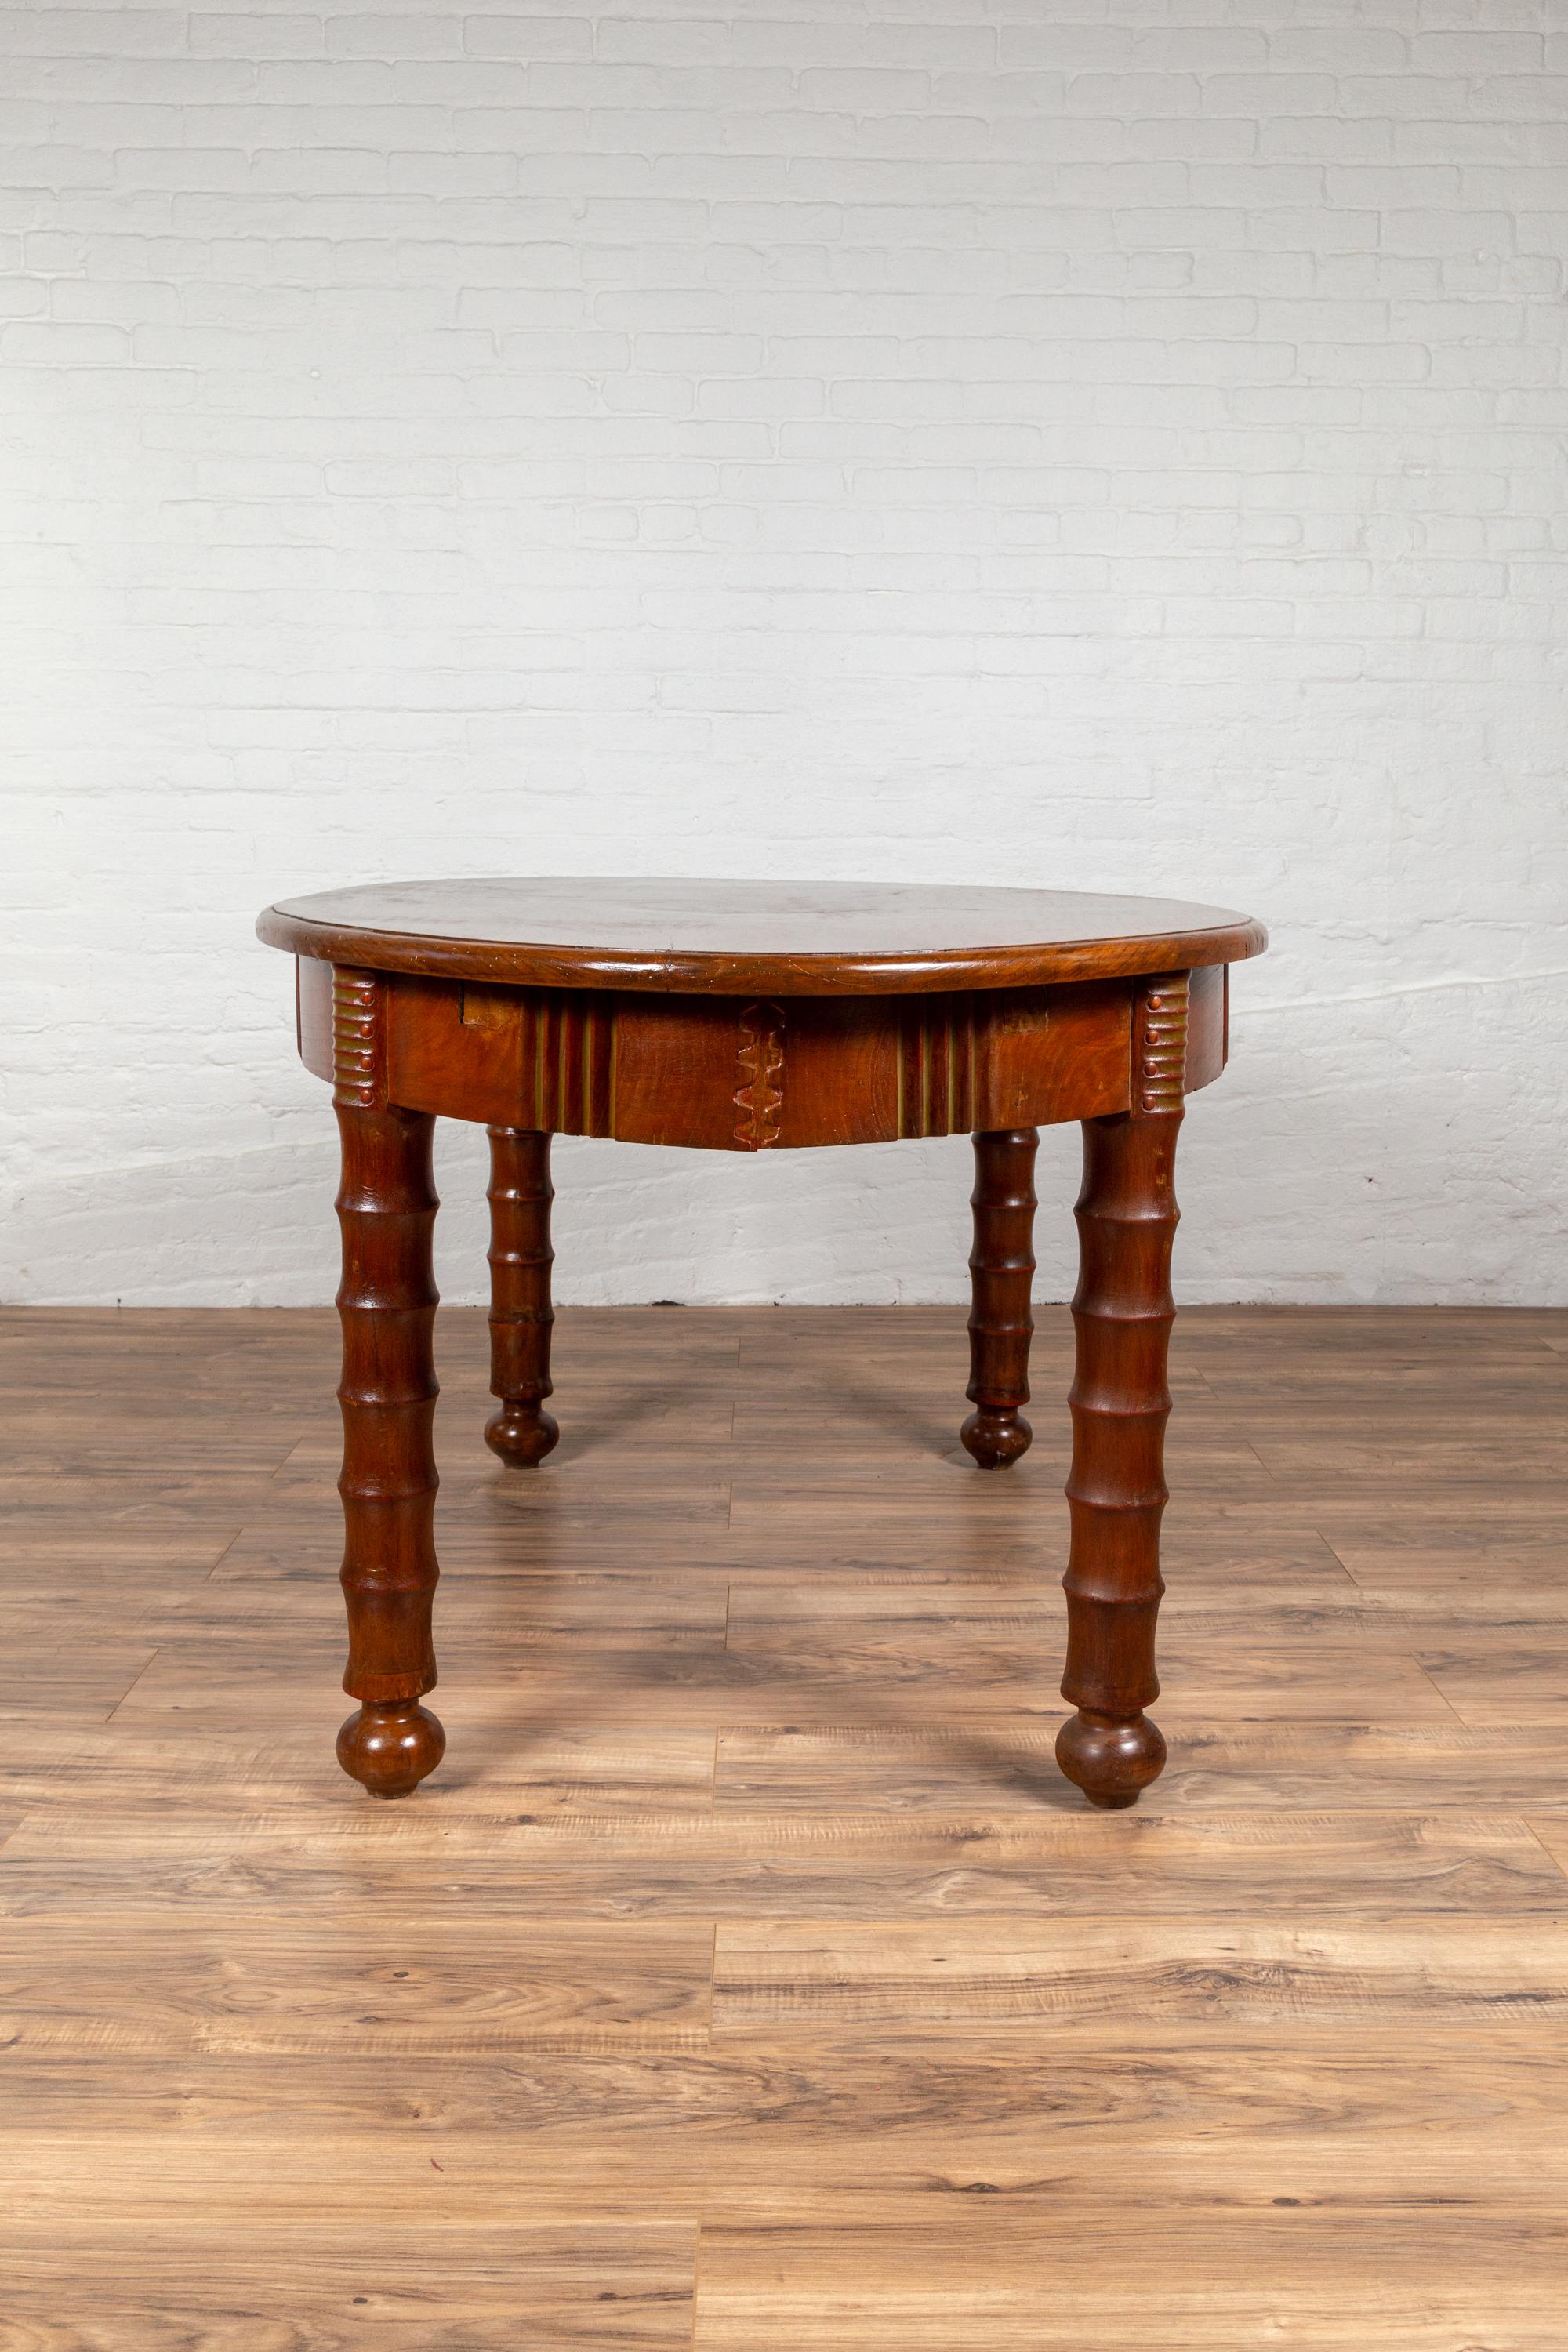 Antique Oval Dining Room Table from Indonesia with Spindle Legs and Warm Patina For Sale 10